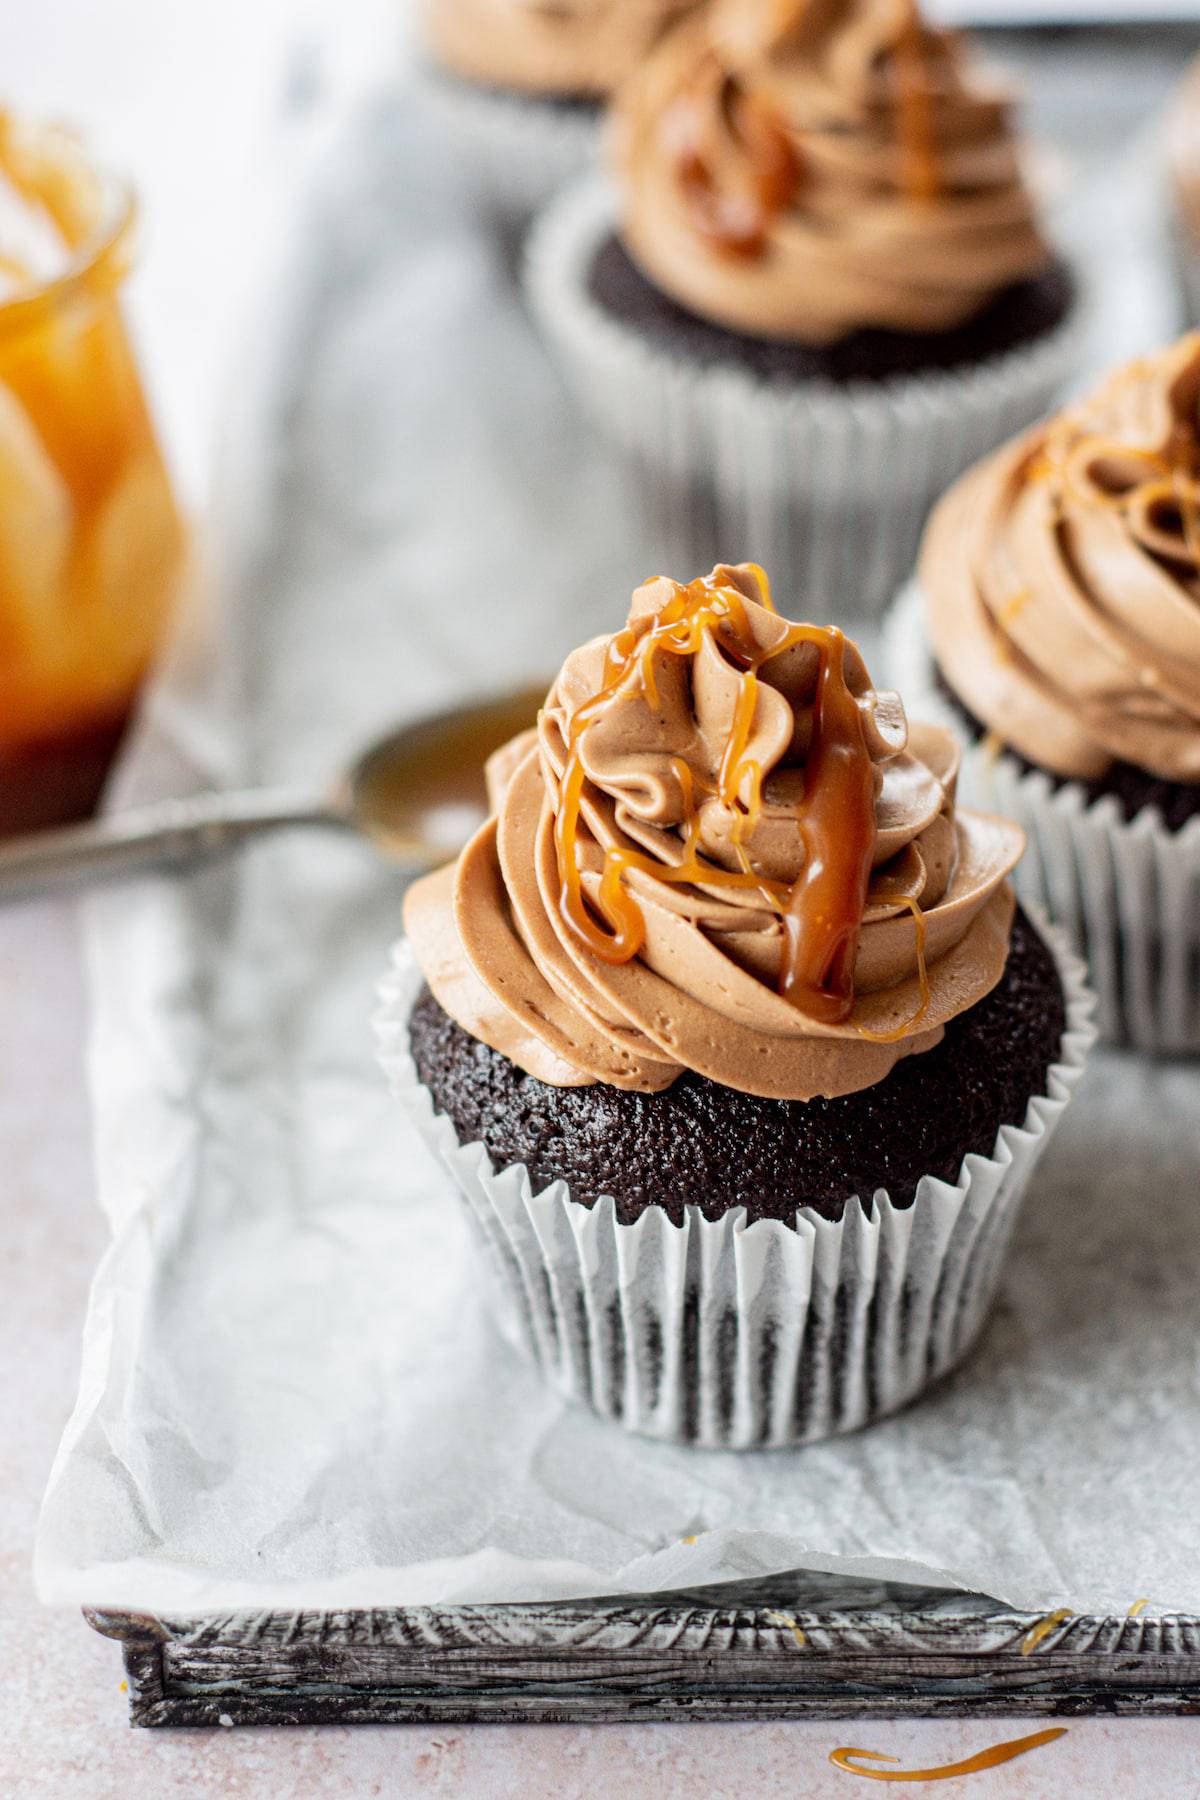 caramel and chocolate topped cupcake.